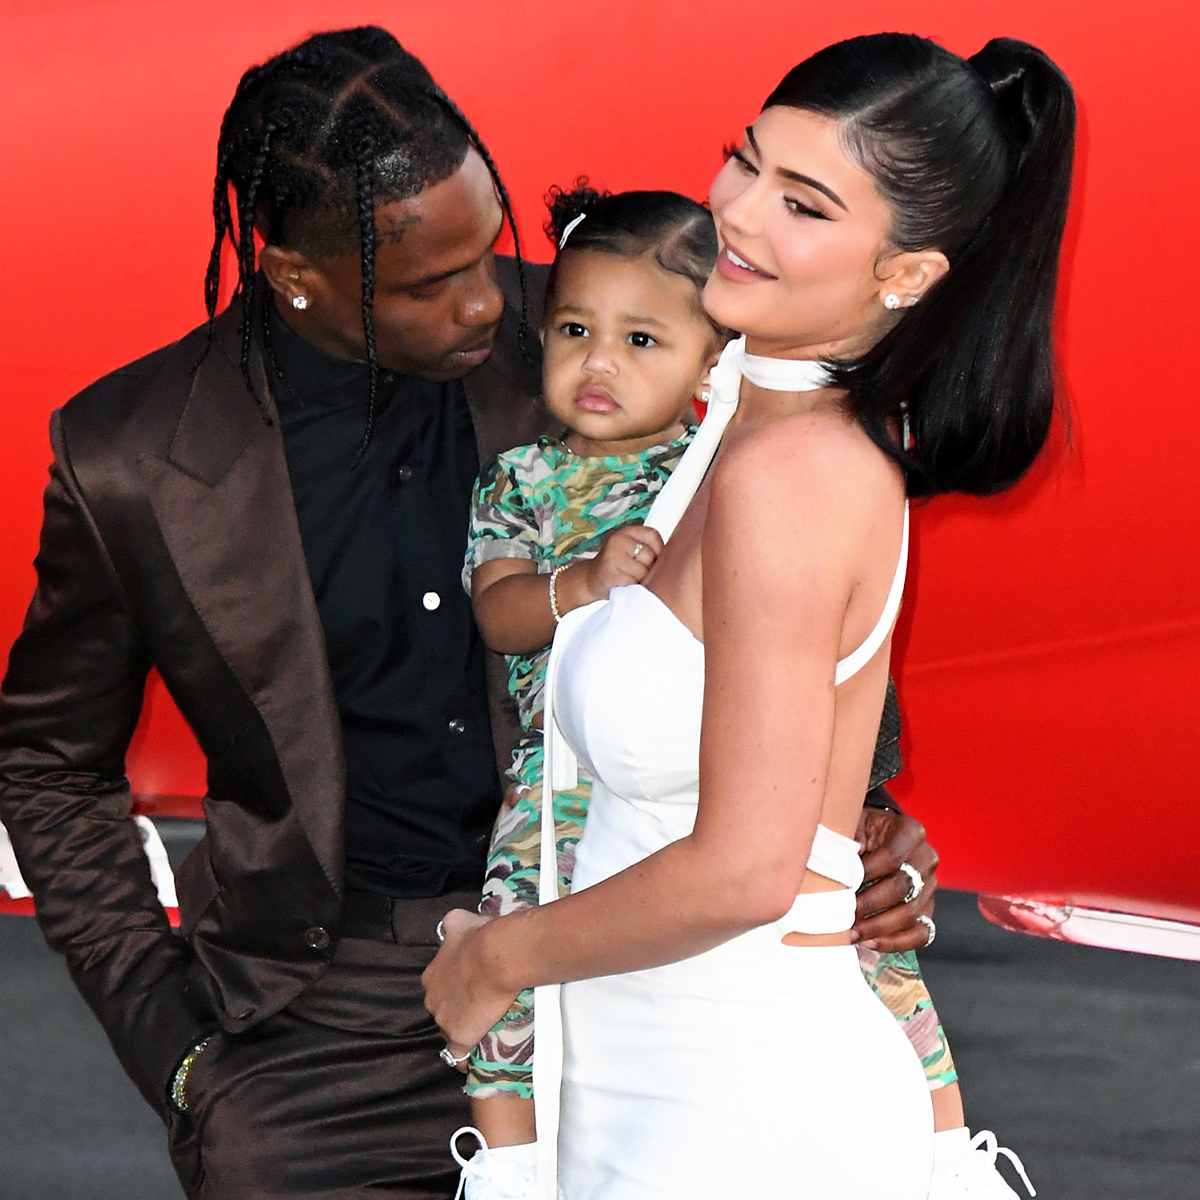 You Might’ve Missed Stormi Webster’s Cameo on Travis Scott’s New Album